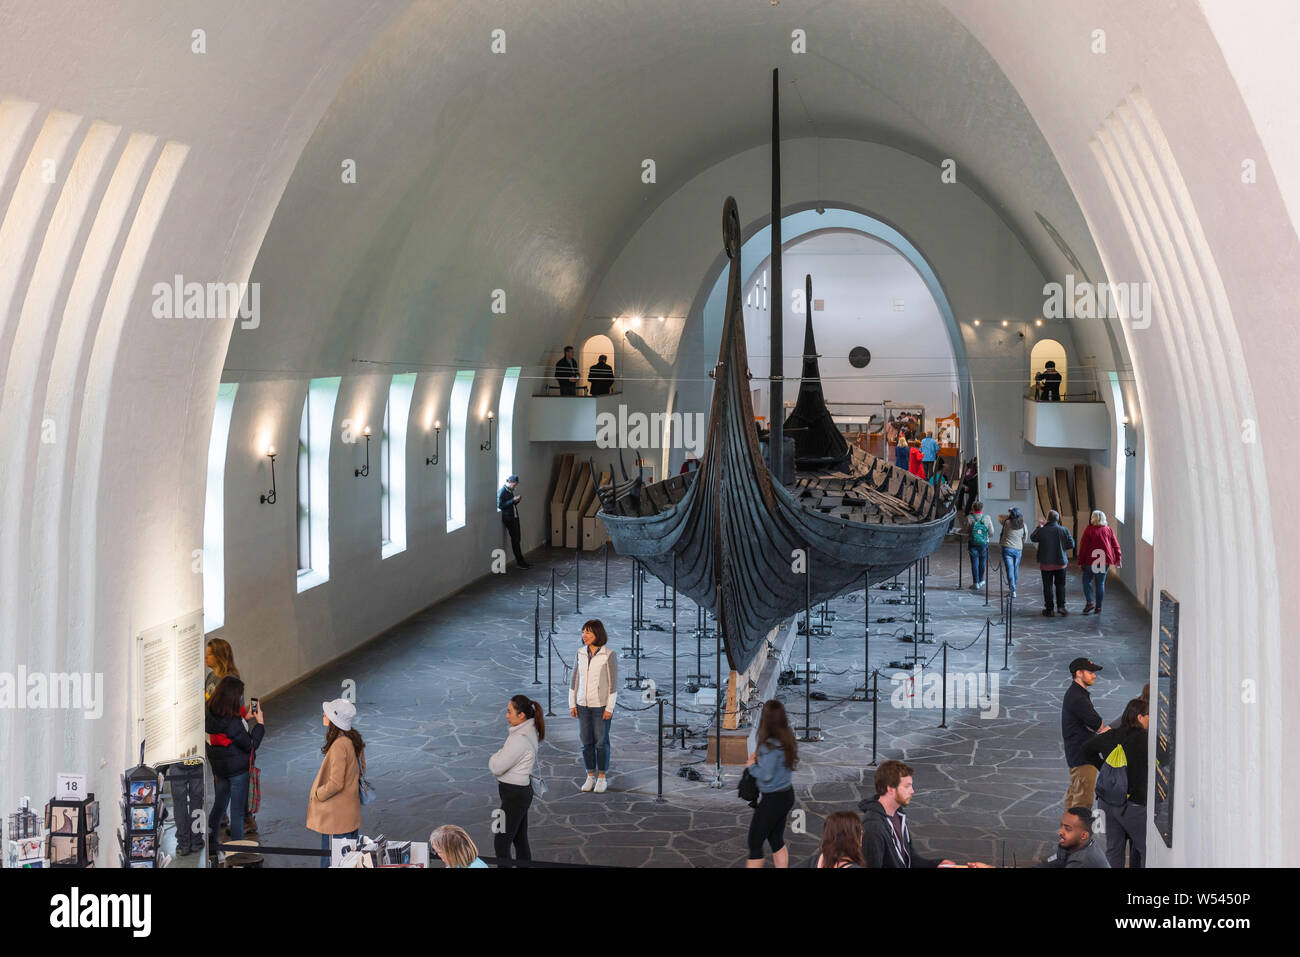 Viking Ship Museum Norway, view of the Oseberg ship sited inside the Viking Ship Museum (Vikingskiphuset) in Bygdoy, Oslo, Norway. Stock Photo